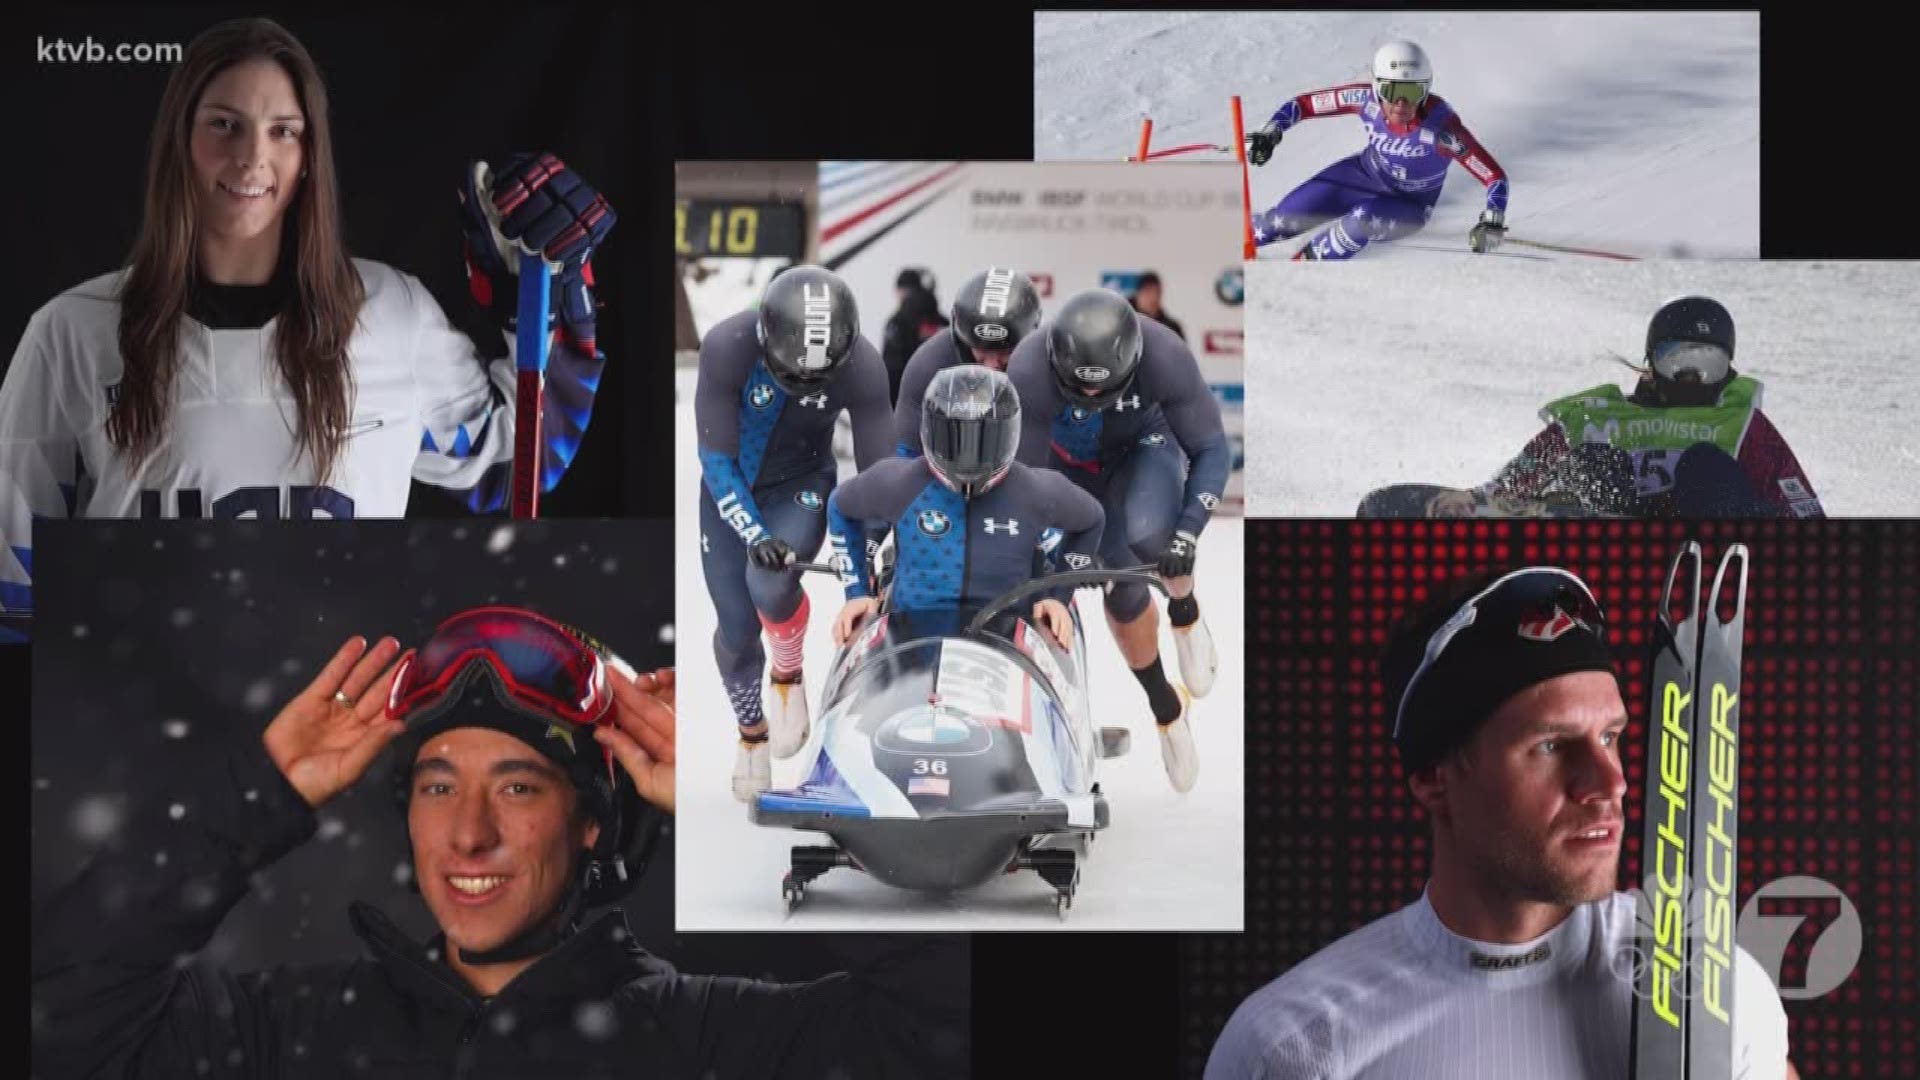 Seven athletes with strong Idaho ties to watch at the 2018 Winter Games in South Korea including a bobsled team with a former Bronco and Vandal.